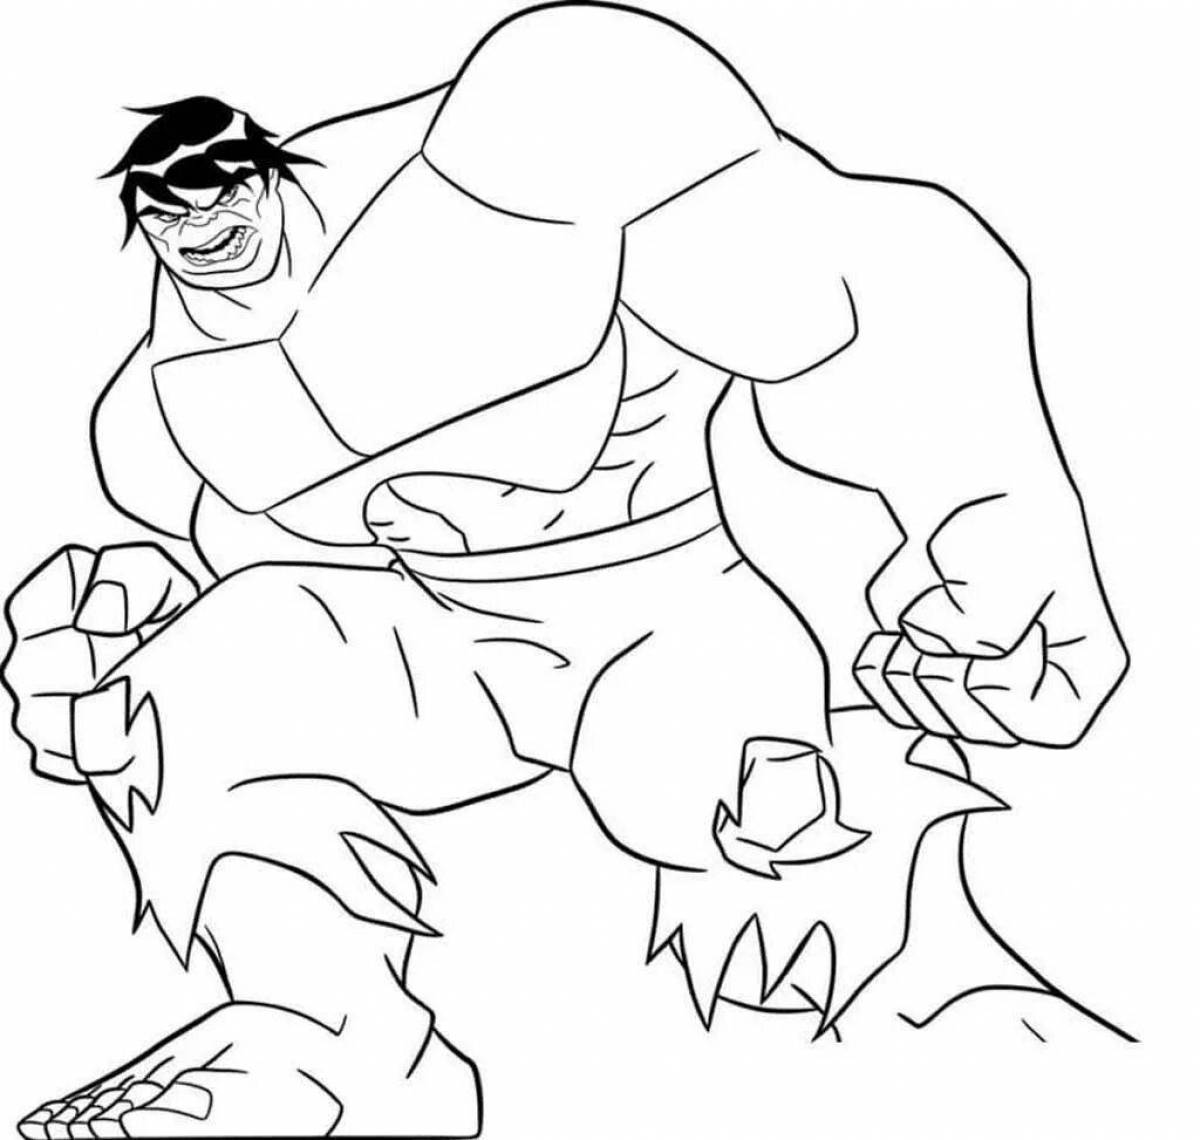 Coloring page gorgeous spider hulk